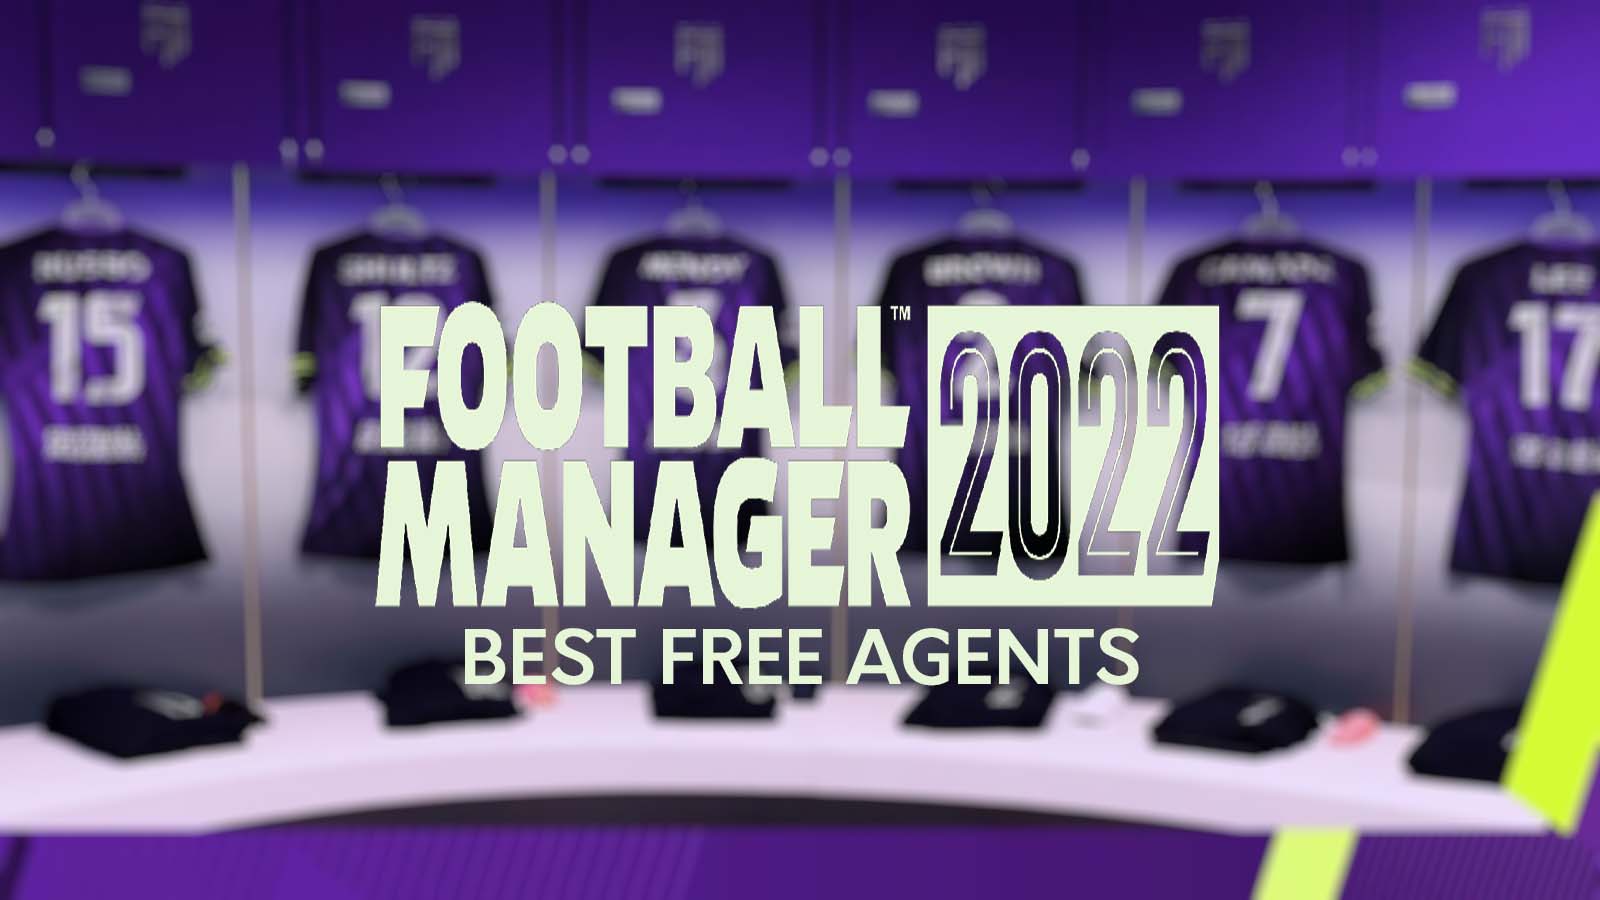 Football manager 2022 best free agents